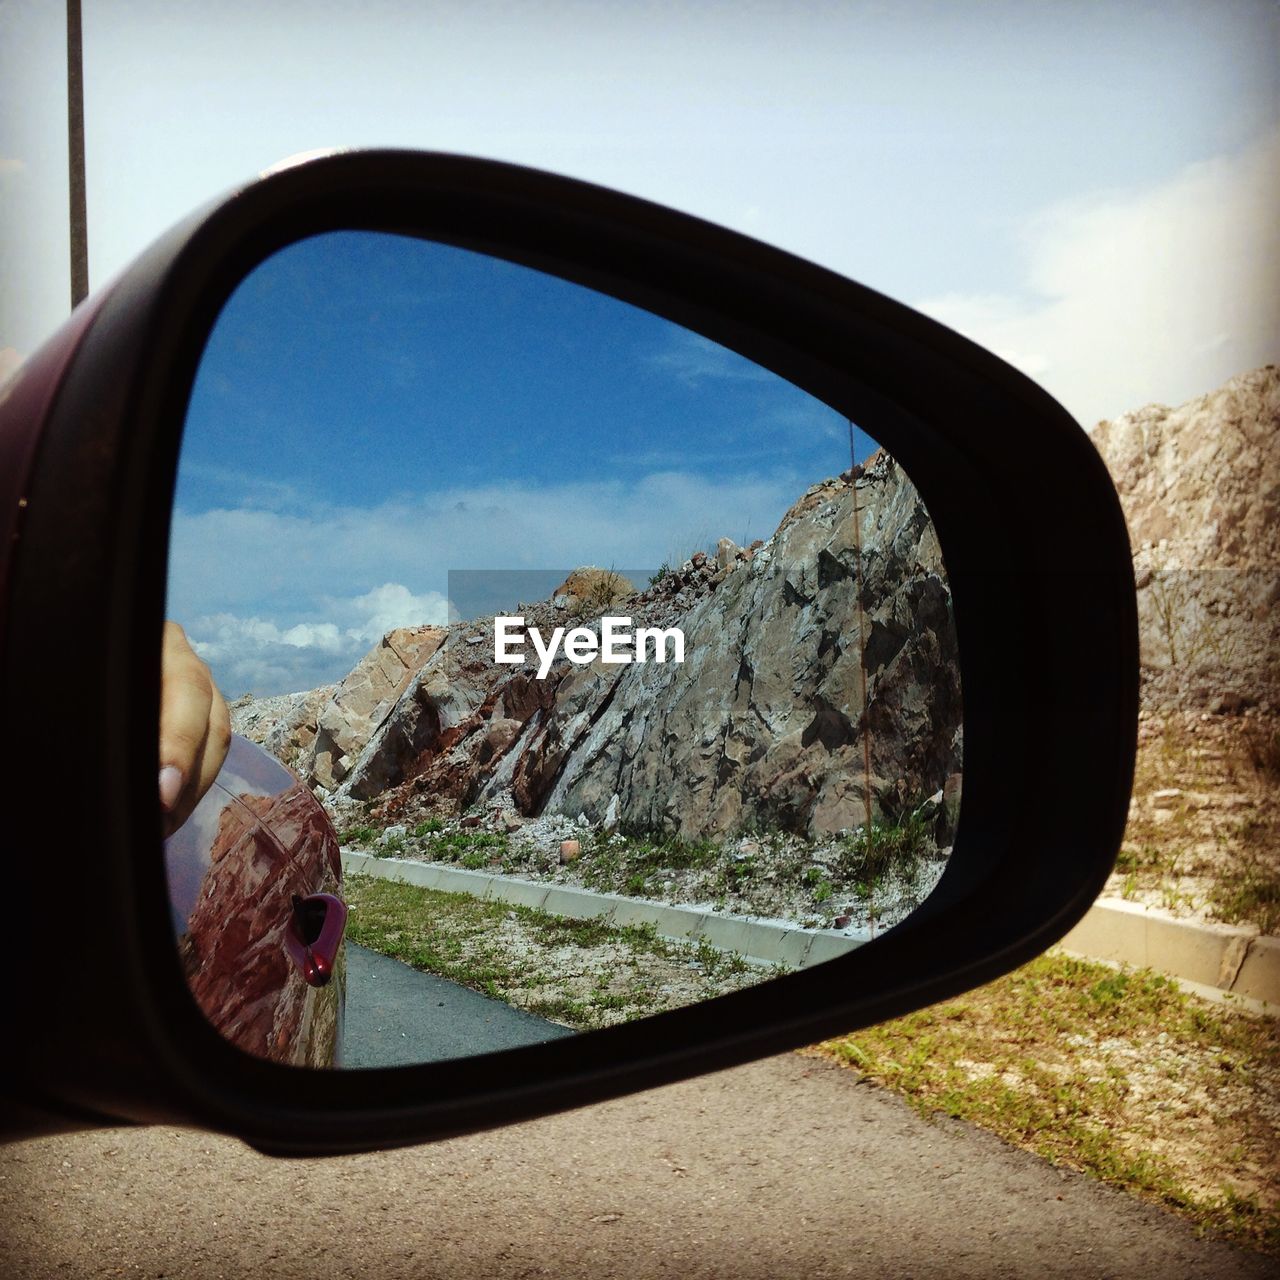 Reflection of rock formation on side-view mirror